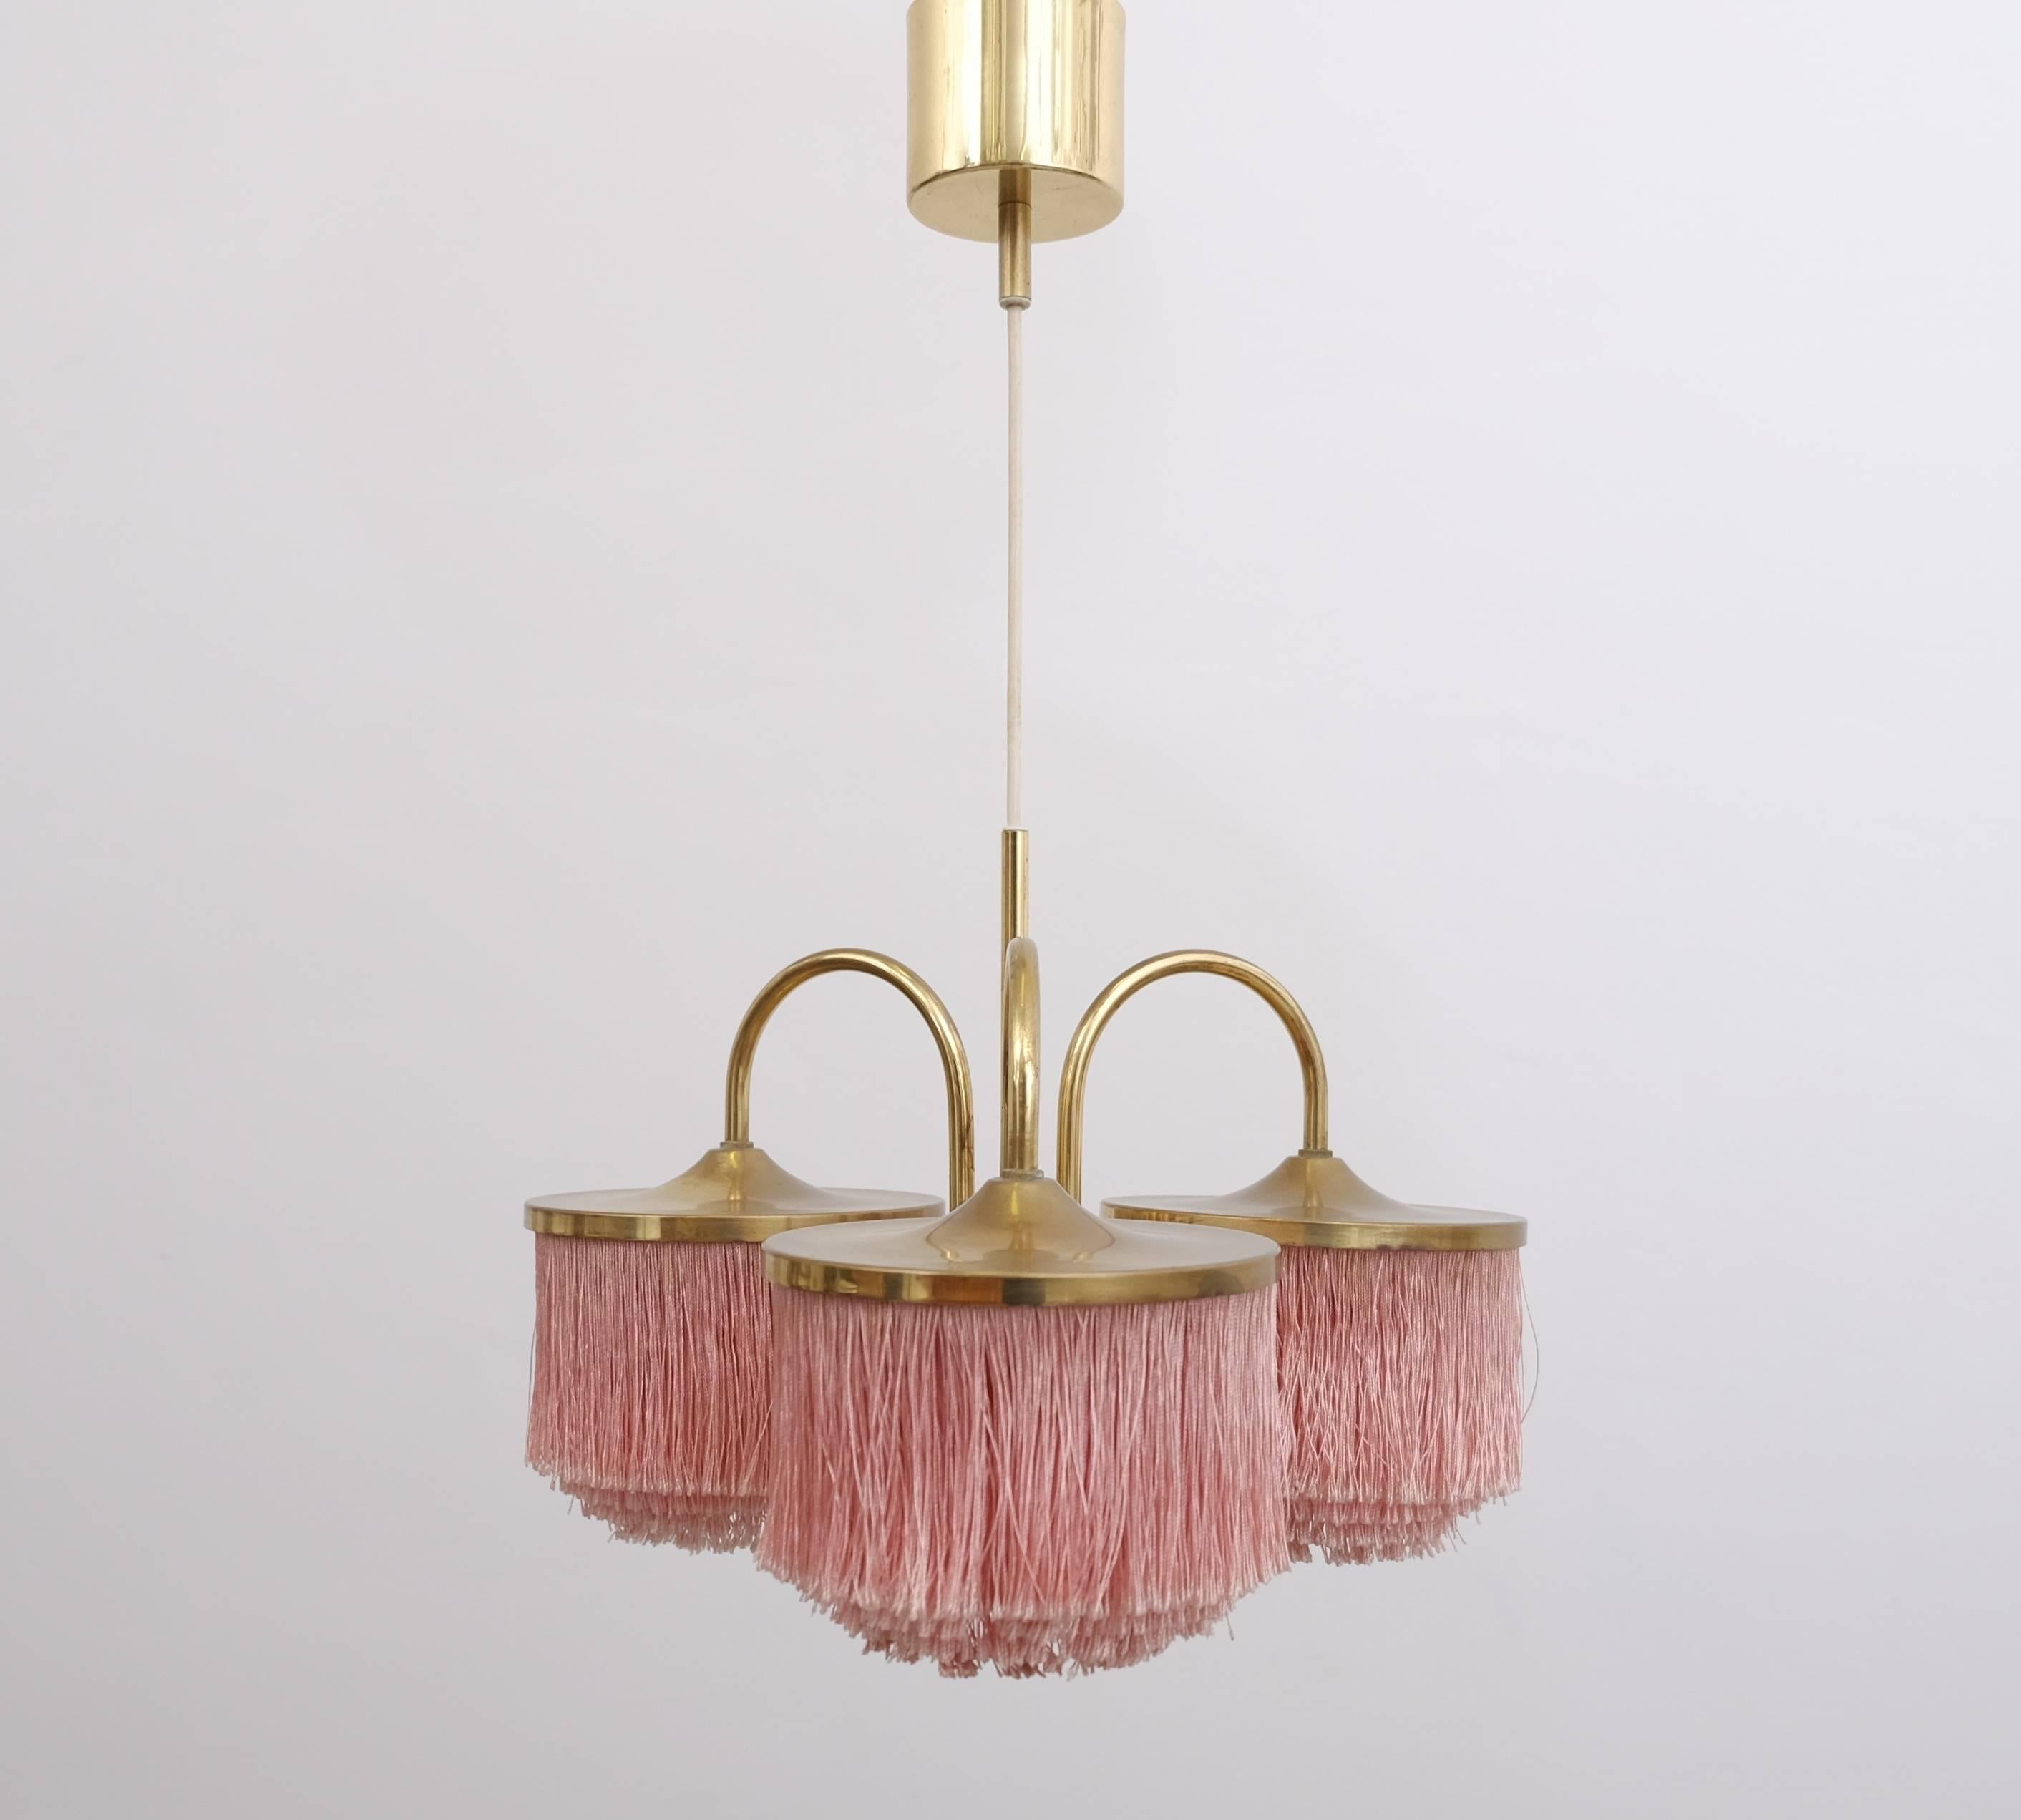 Rare three-armed Hans-Agne Jakobsson pendant with pink fringes.
Produced by Hans-Agne Jakobsson in Markaryd, Sweden, 1960s.